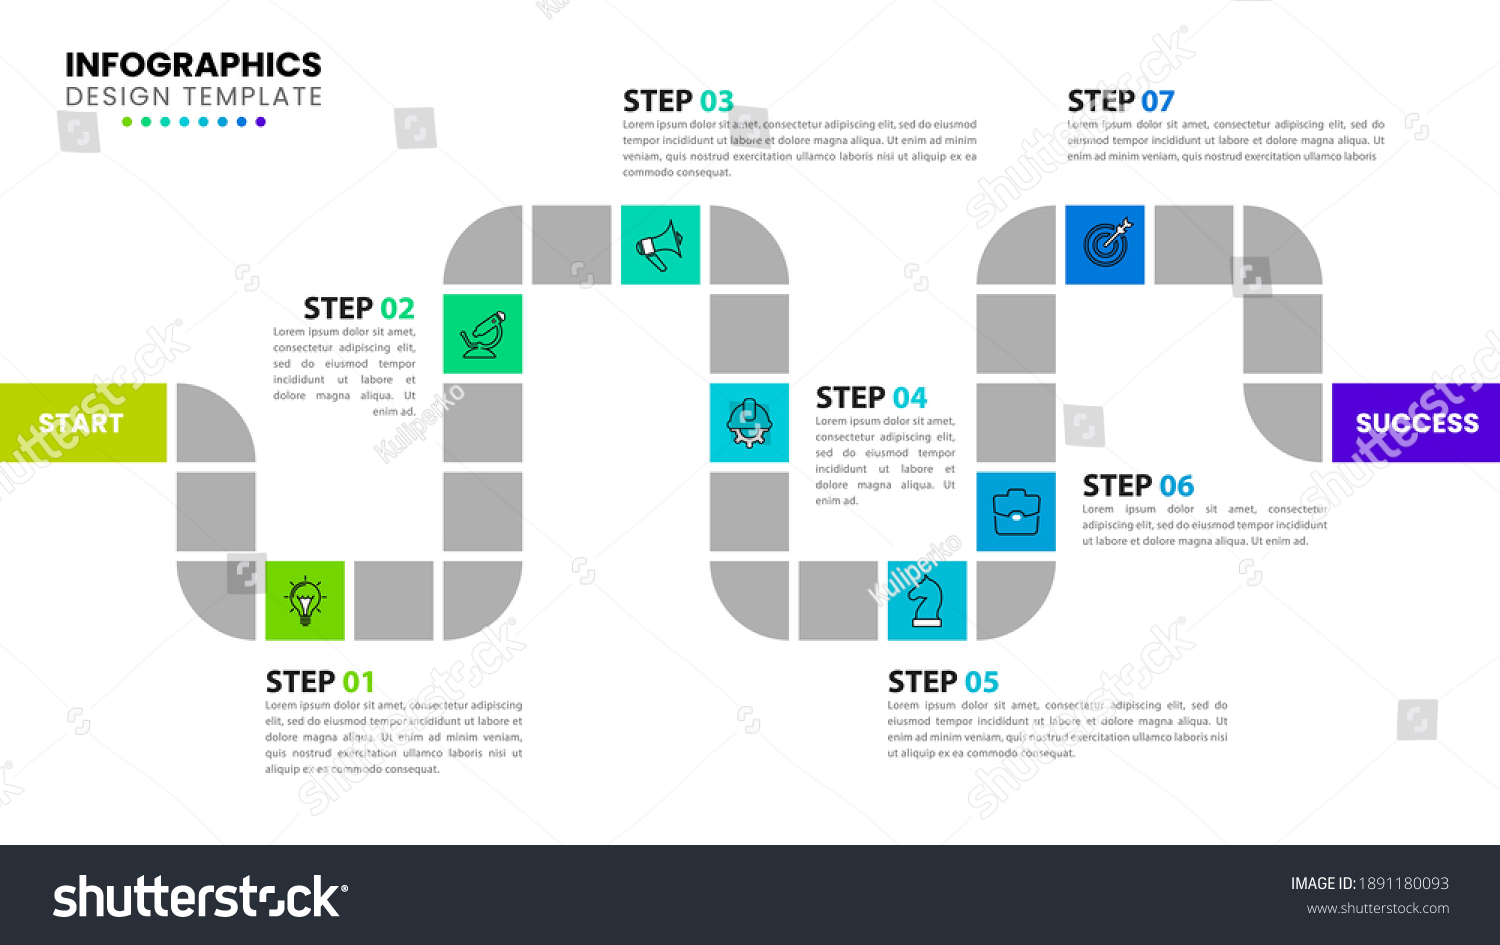 SVG of Infographic design template. Timeline concept with 7 steps. Can be used for workflow layout, diagram, banner, webdesign. Vector illustration svg